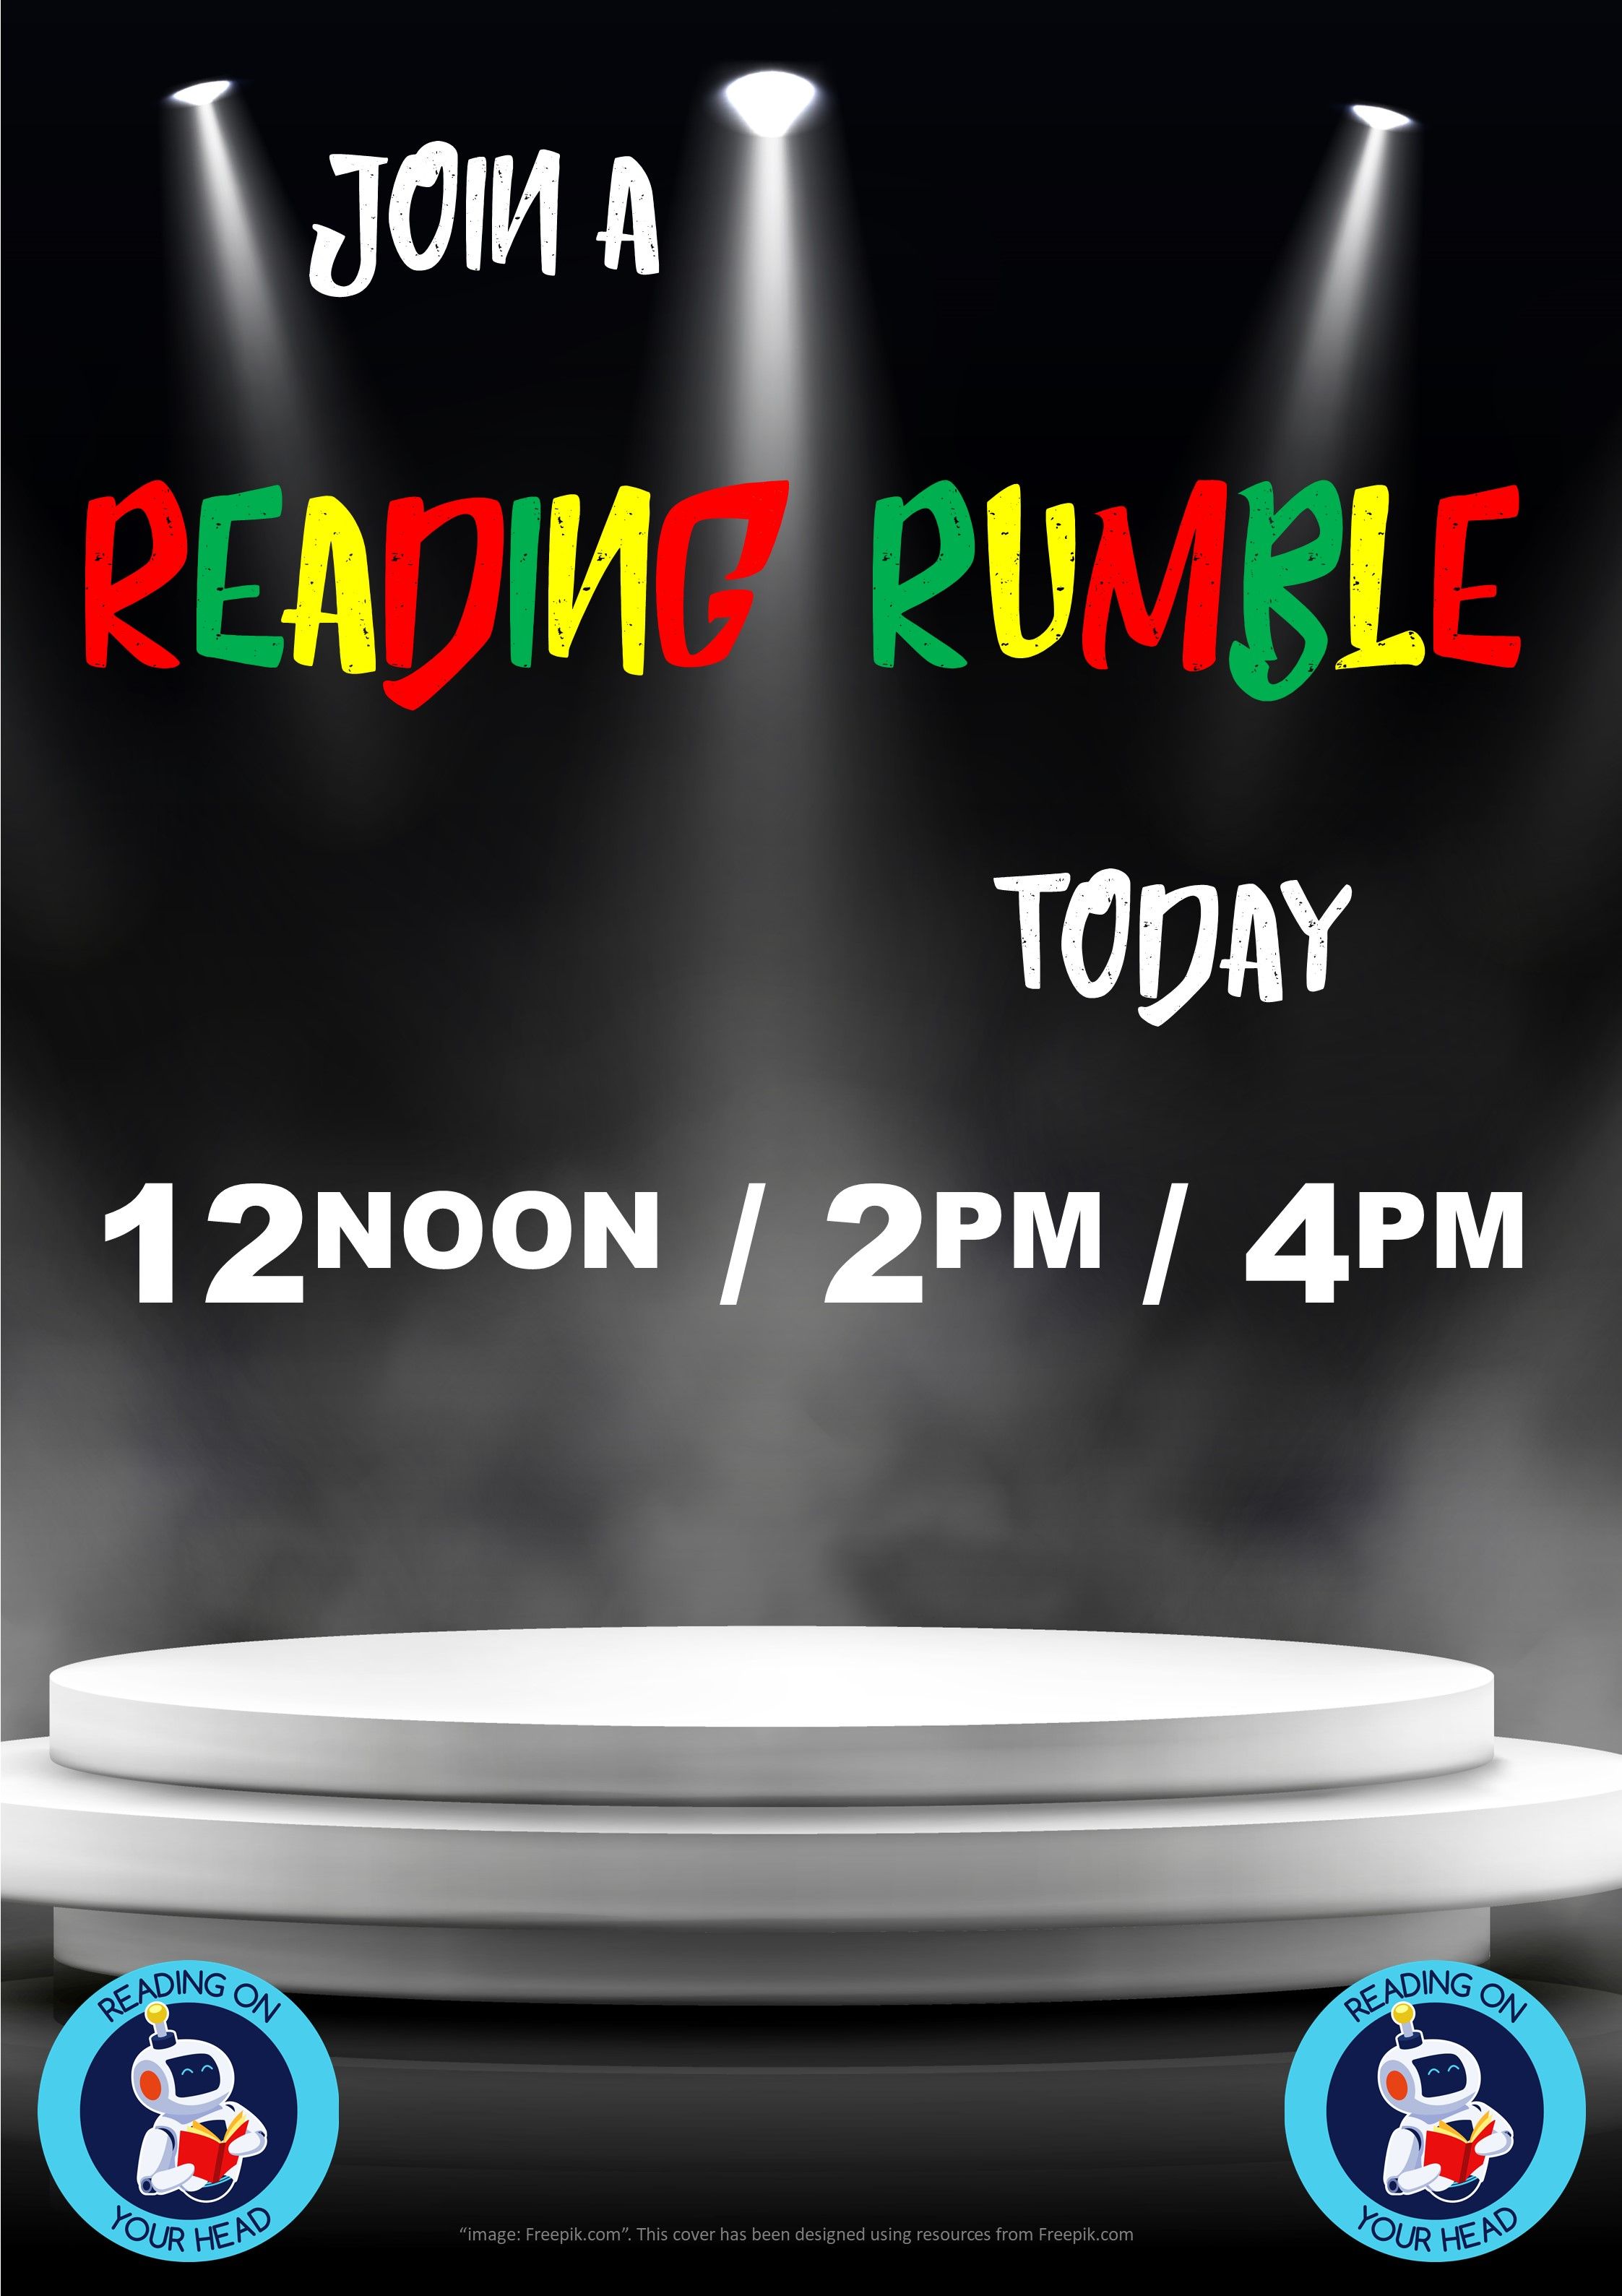 Join us for a live READING RUMBLE!